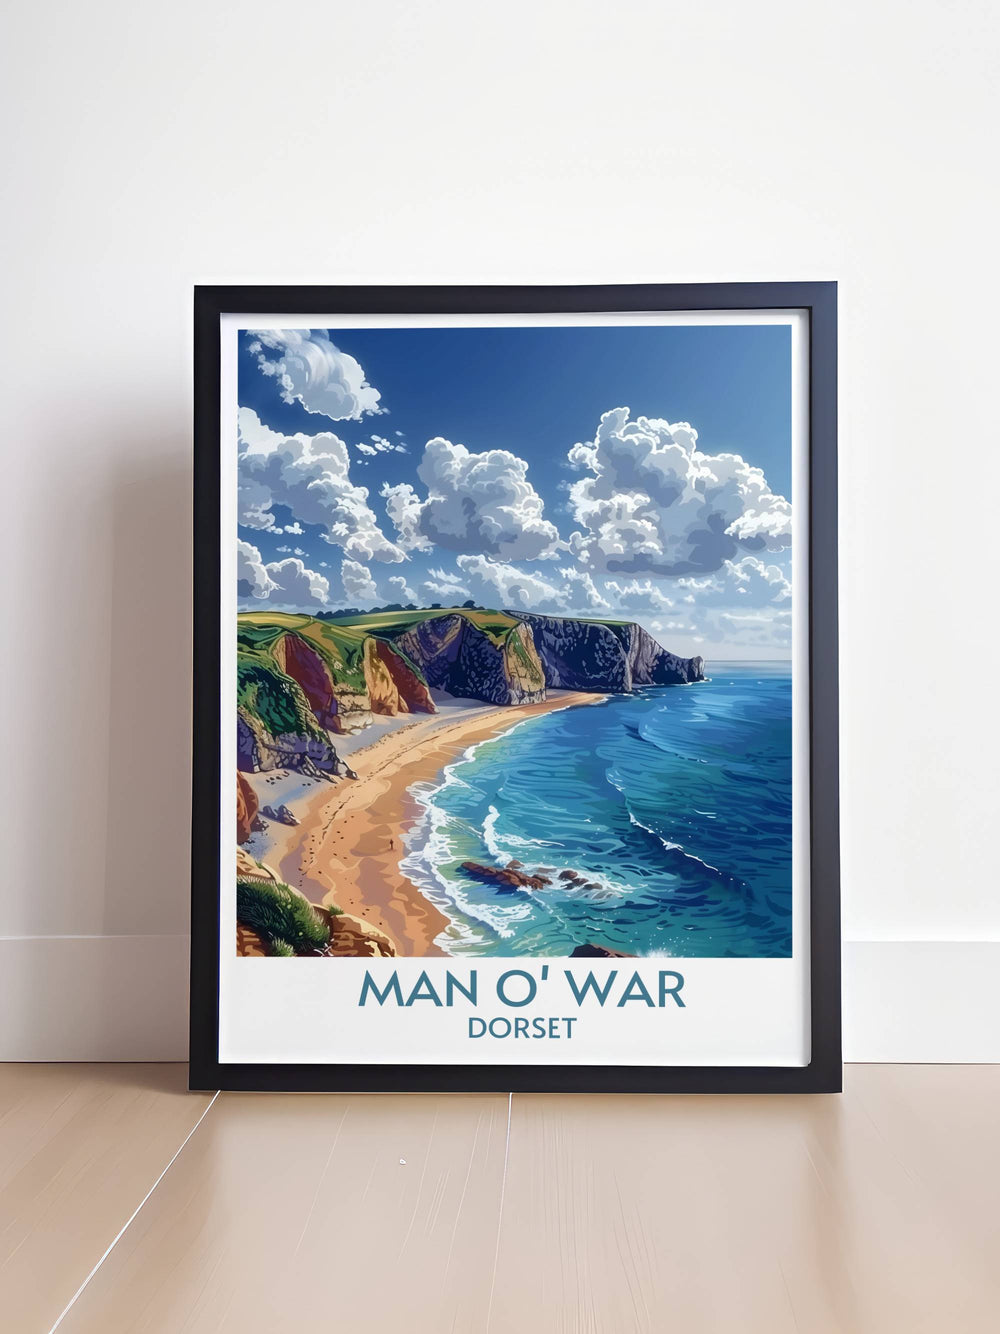 Majestic view of Durdle Door Arch and Man o War Beach on the Jurassic Coast of Dorset perfect for Dorset posters prints and wall art bringing the natural wonder of these iconic landmarks into your home as beautiful and timeless pieces of artwork and photography.